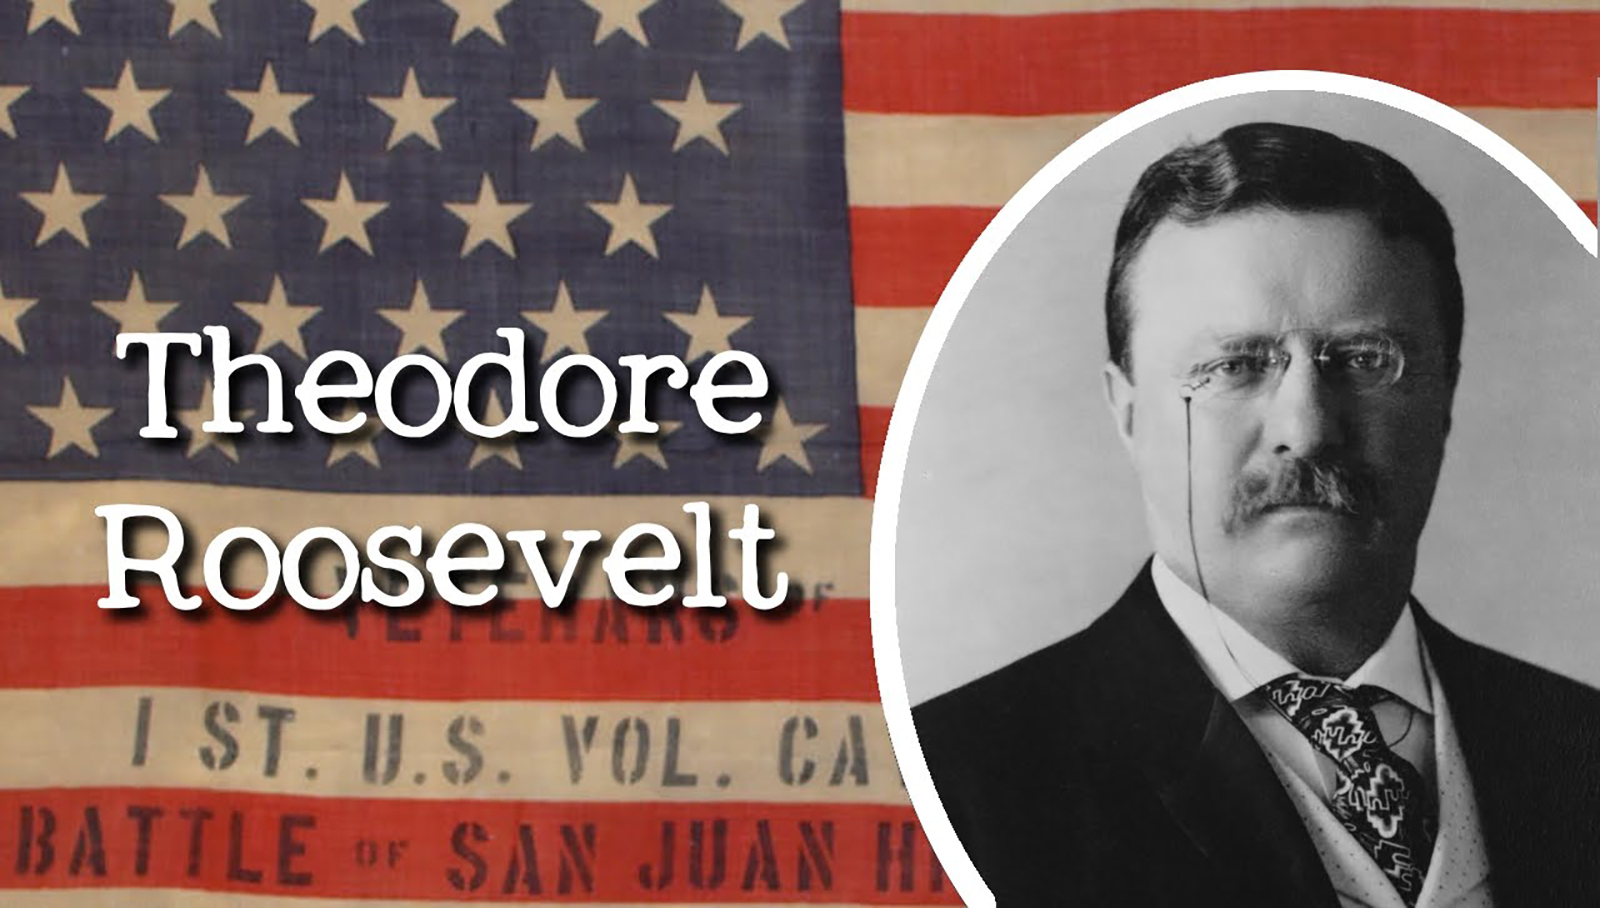 American flag background with a round, white-framed image of President Theodore Roosevelt in the lower right hand corner